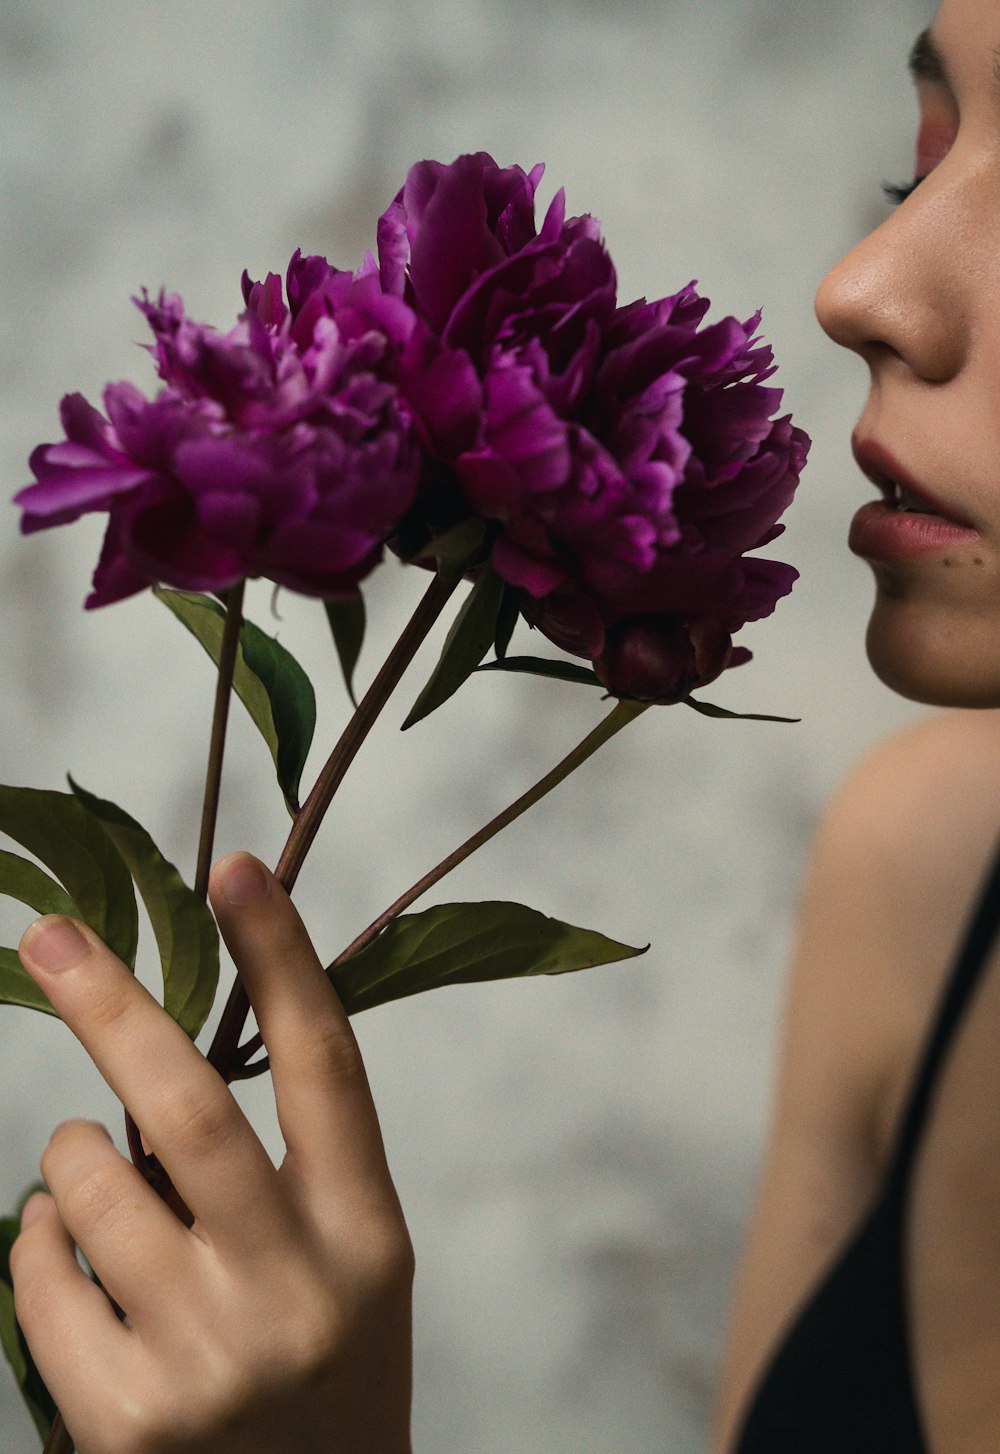 woman holding purple flower during daytime